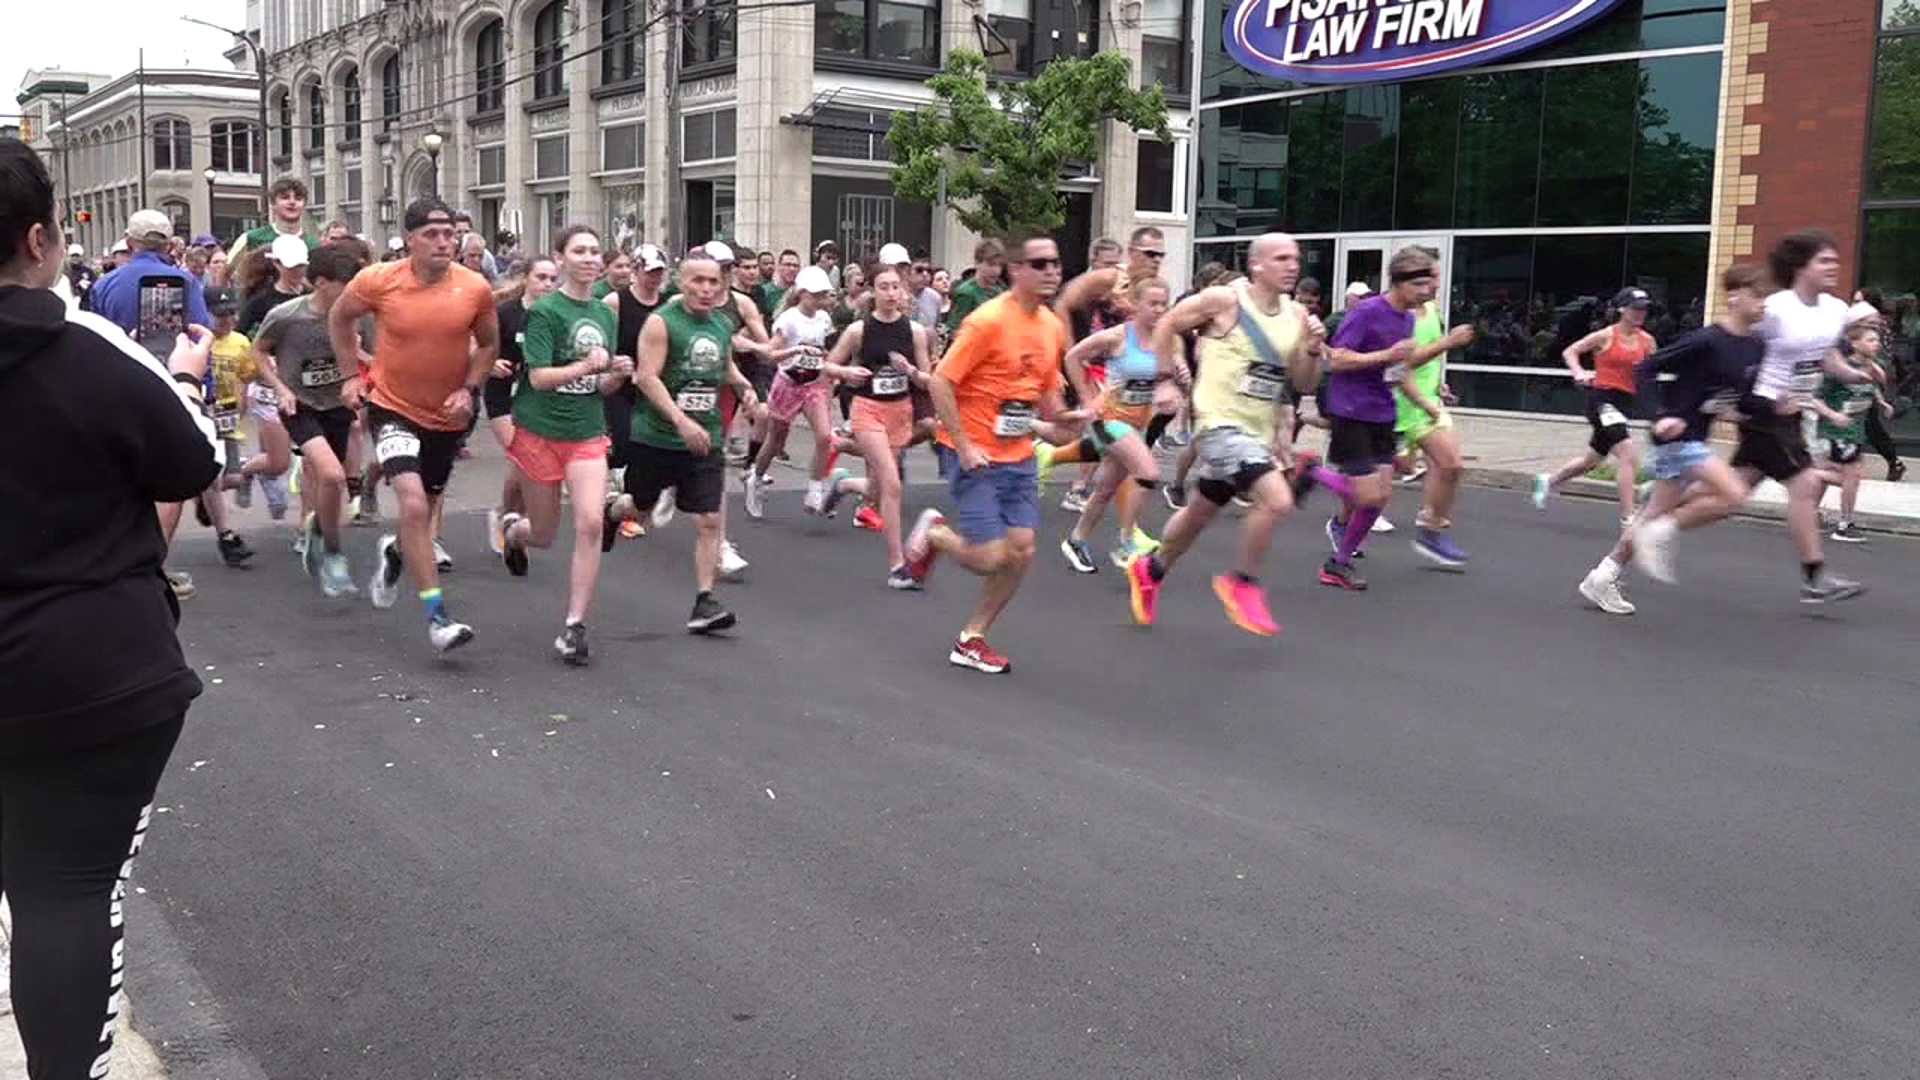 The Heroes of All Kinds 5K Run/Walk kicked off before the Armed Forces Parade Saturday morning in Scranton.